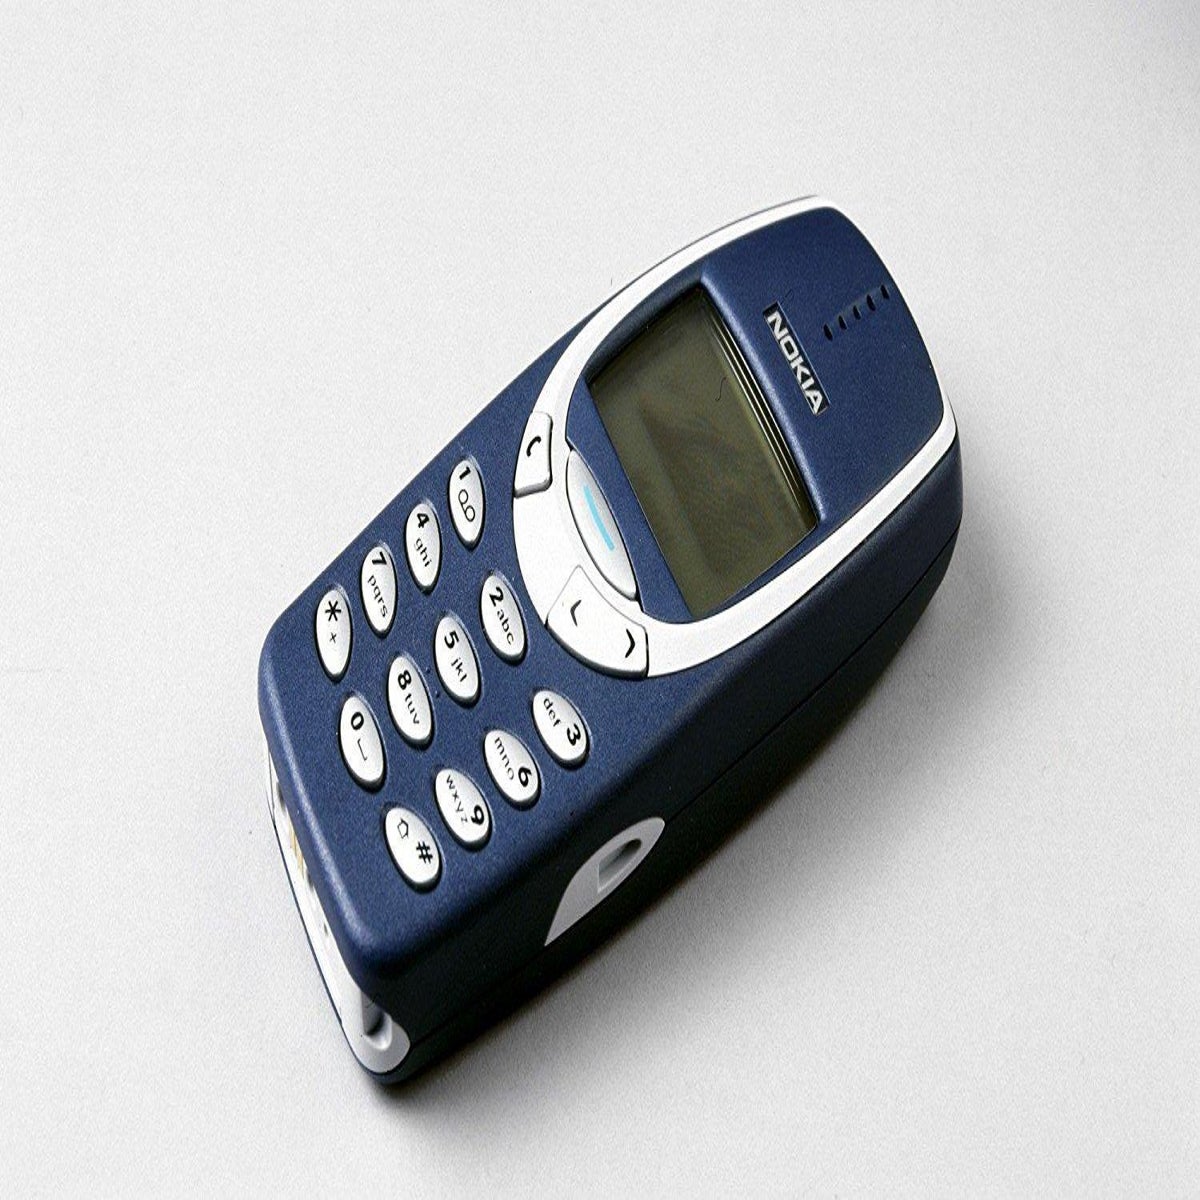 Nokia 215 Mobile Sex - Nokia 3310, 'the most reliable phone ever made', to be re-launched at MWC  2017 | The Independent | The Independent